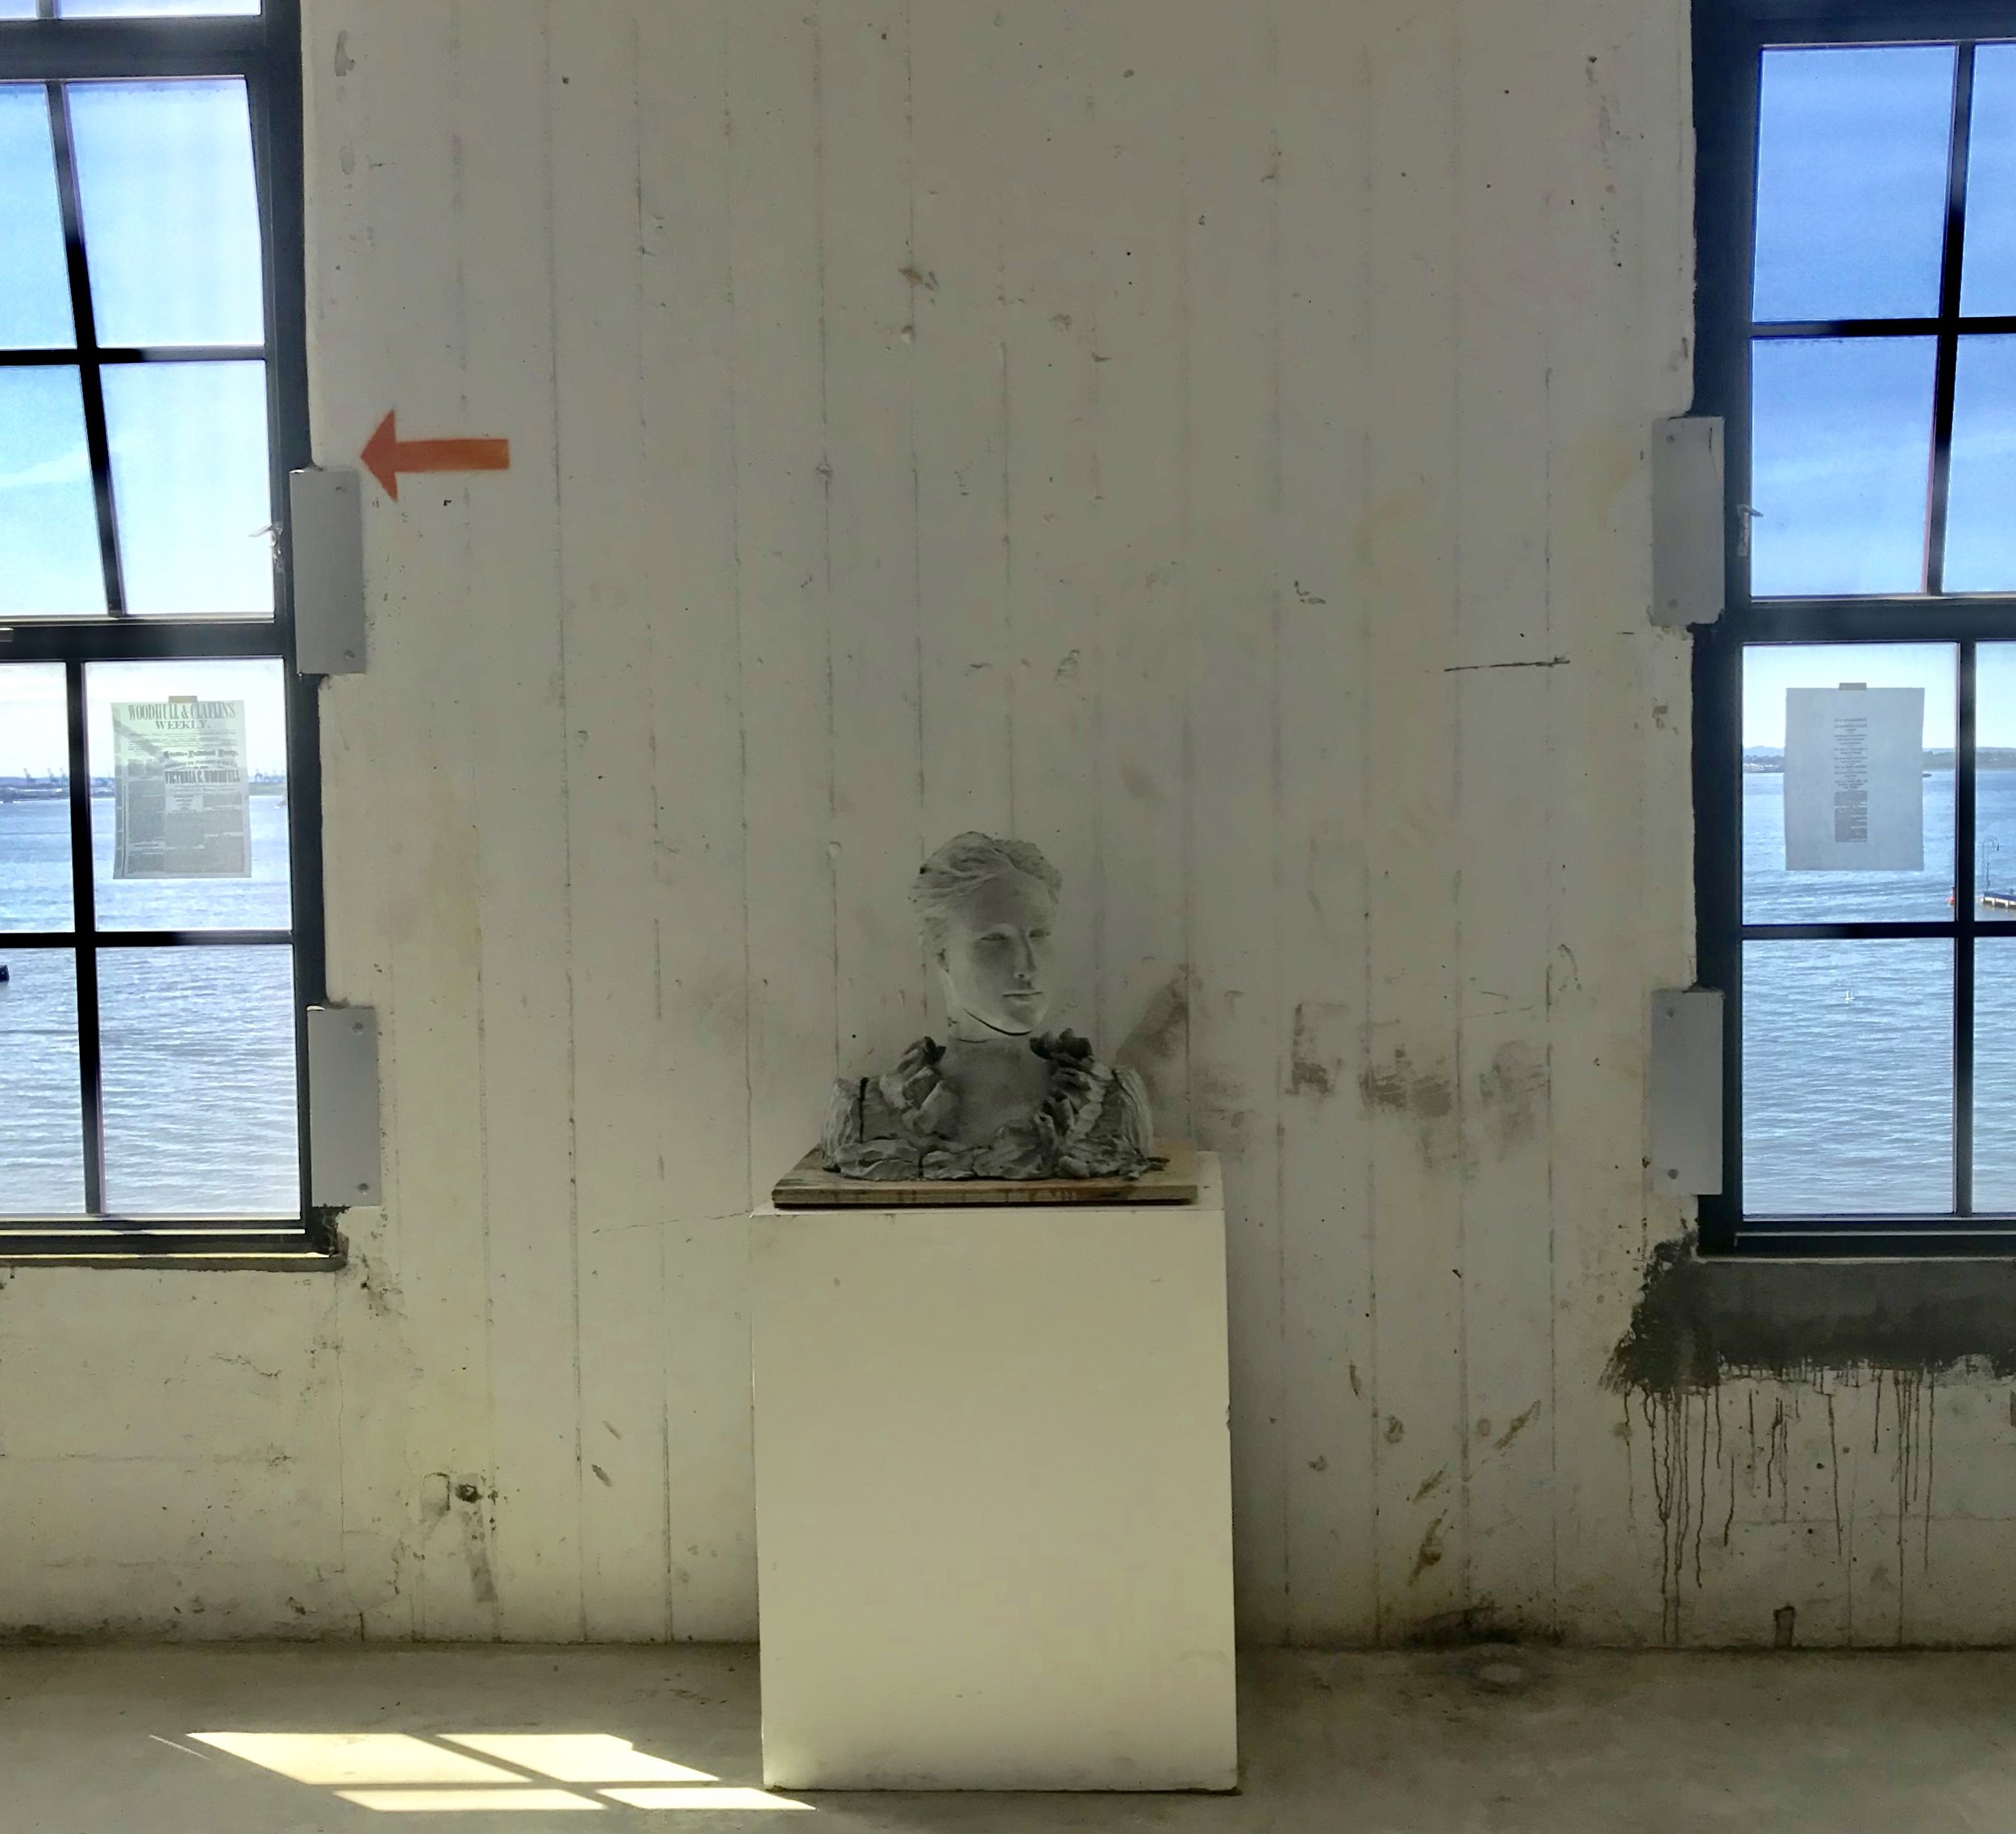  Mother Mold (Victoria Woodhull)   clay negative, 2019   [Detail of installation included in “Kara Walker presents: The Colossus of Rutgers”, Brooklyn Army Terminal, 2019] 